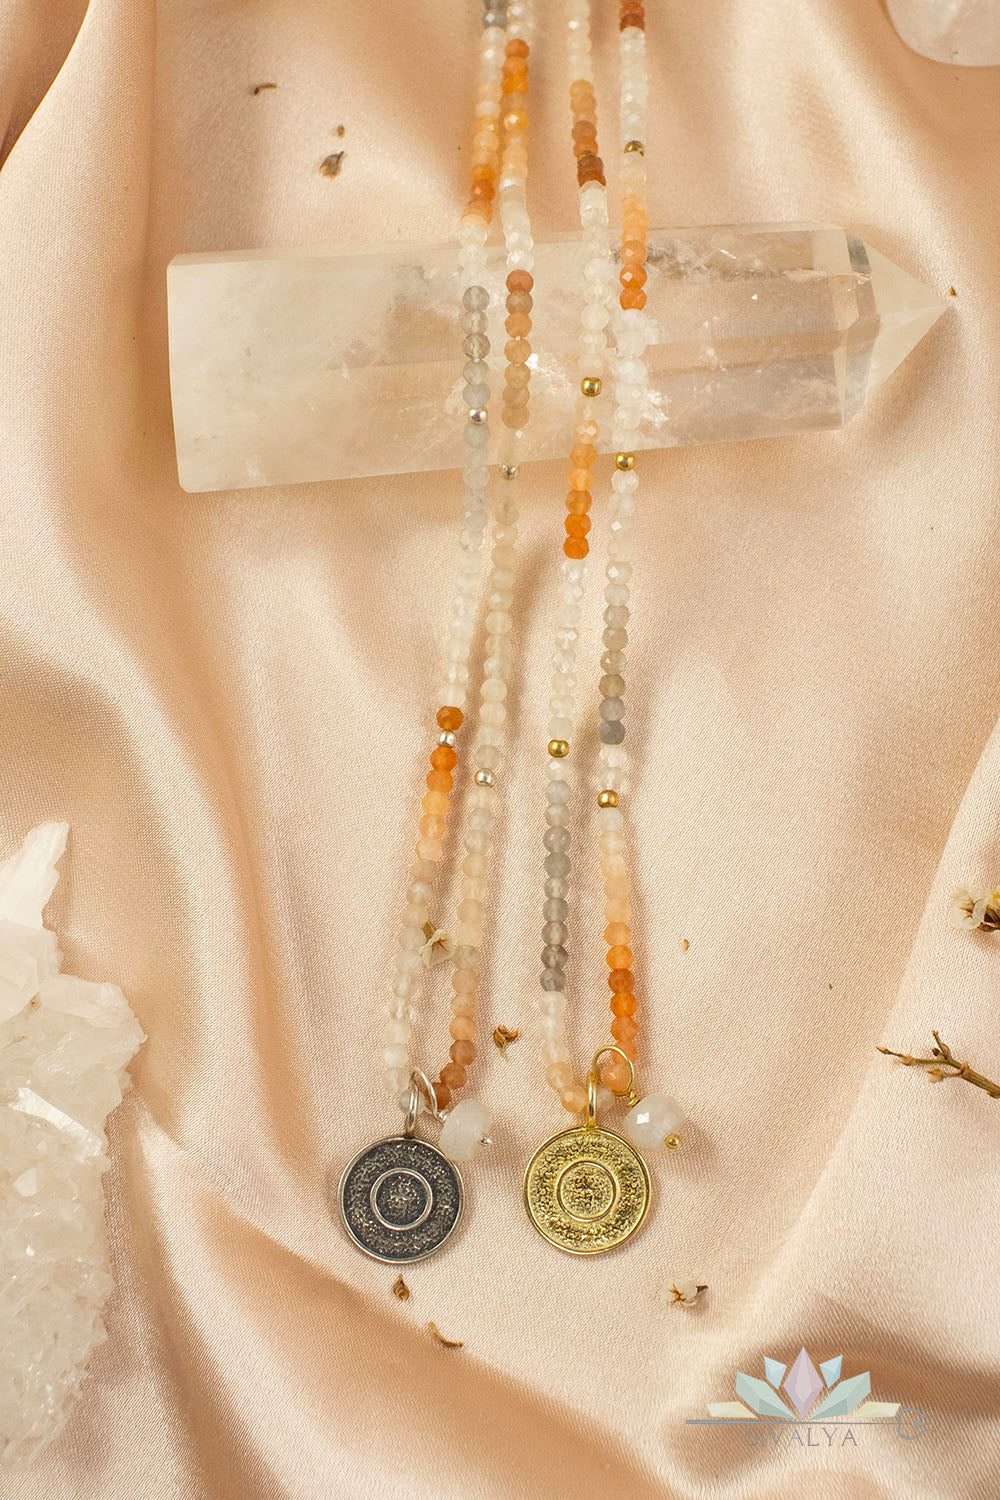 Sivalya Ether Element Peach Moonstone Necklace